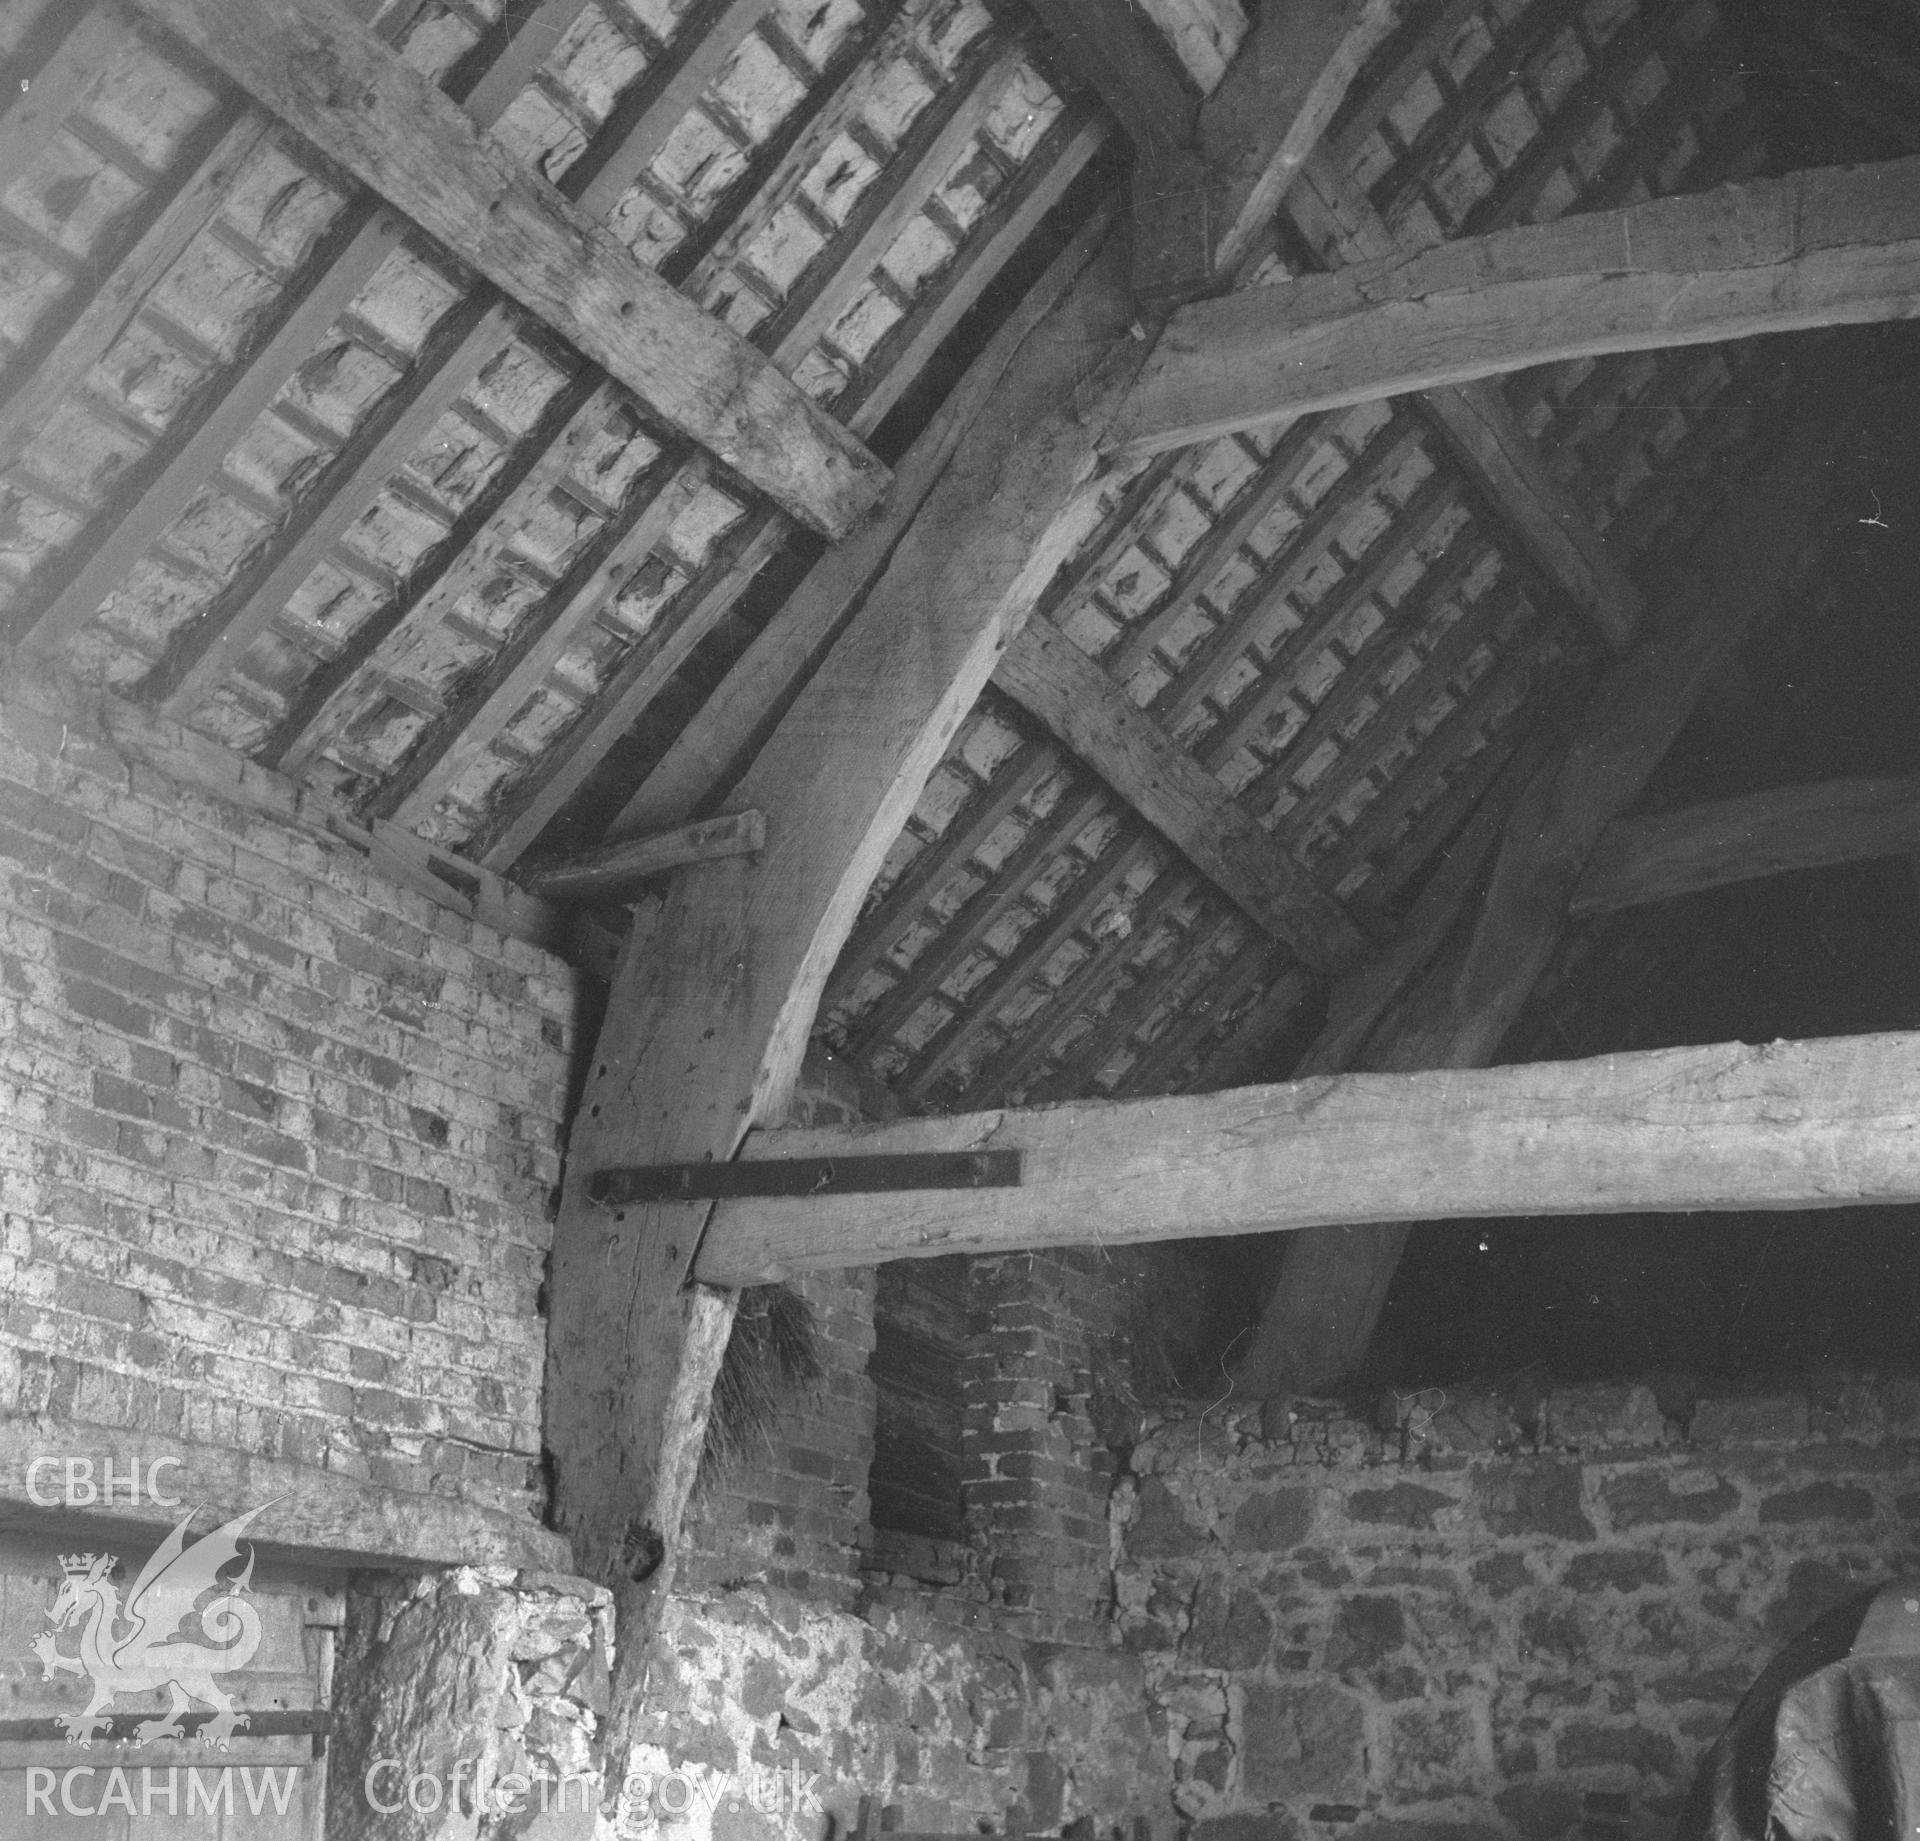 Digital copy of a black and white nitrate negative showing cruck timbers in the barn at Rhual.